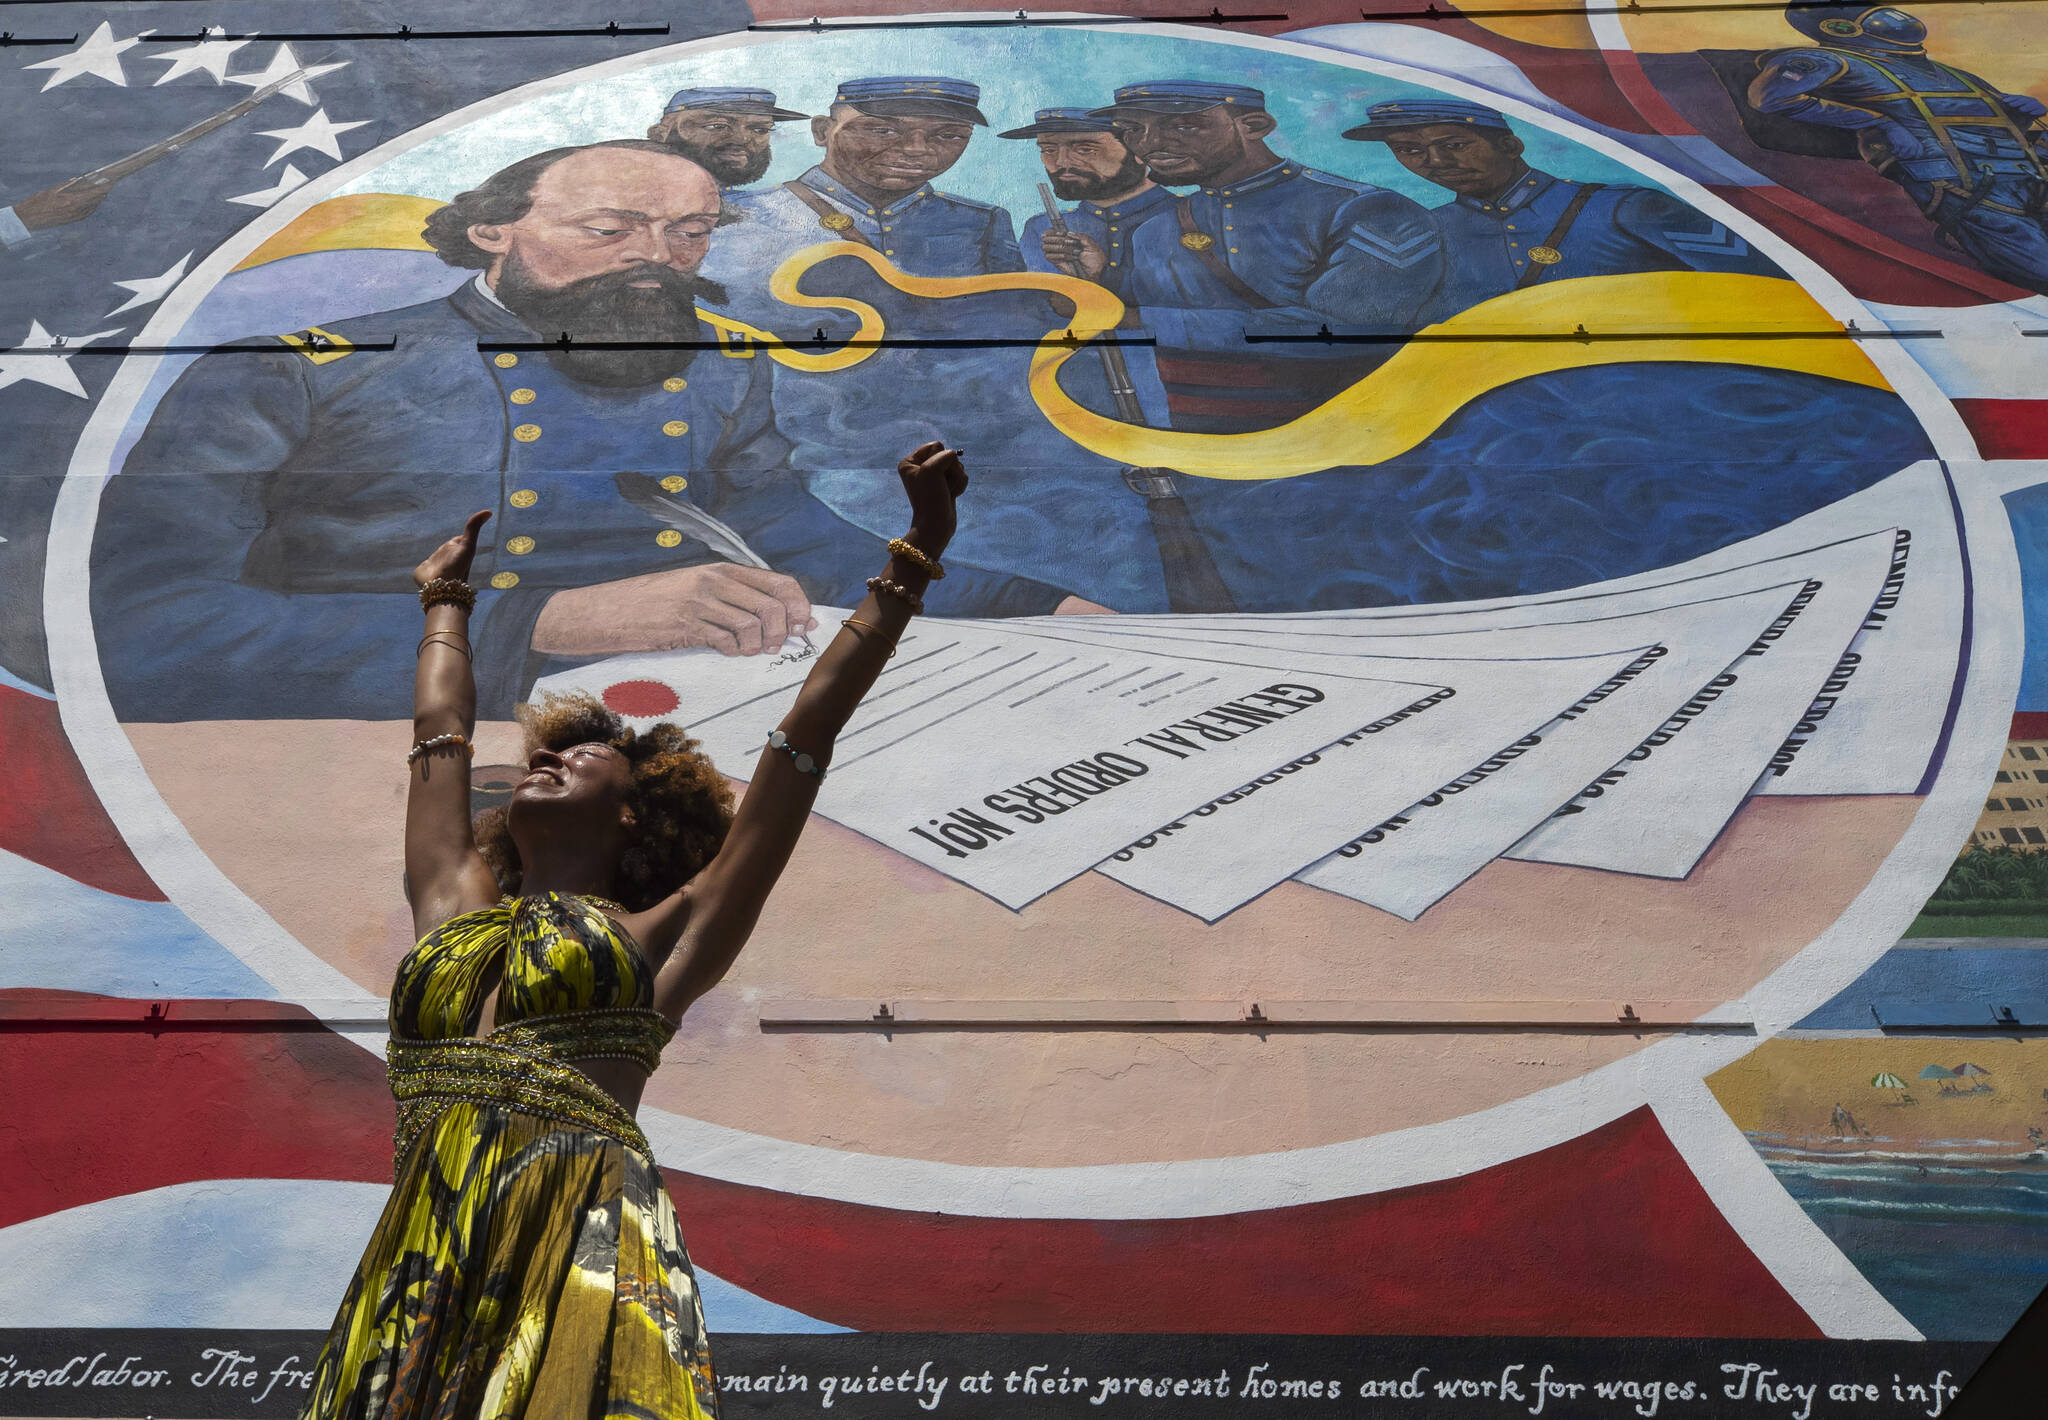 FILE - Dancer Prescylia Mae, of Houston, performs during a dedication ceremony for the mural "Absolute Equality" in downtown Galveston, Texas, on June 19, 2021. Recognition of Juneteenth, the effective end of slavery in the U.S., gained traction after the police killing of George Floyd in 2020. But after an initial burst of action, the movement to have it recognized as an official holiday in the states has largely stalled. (Stuart Villanueva/The Galveston County Daily News via AP, File)